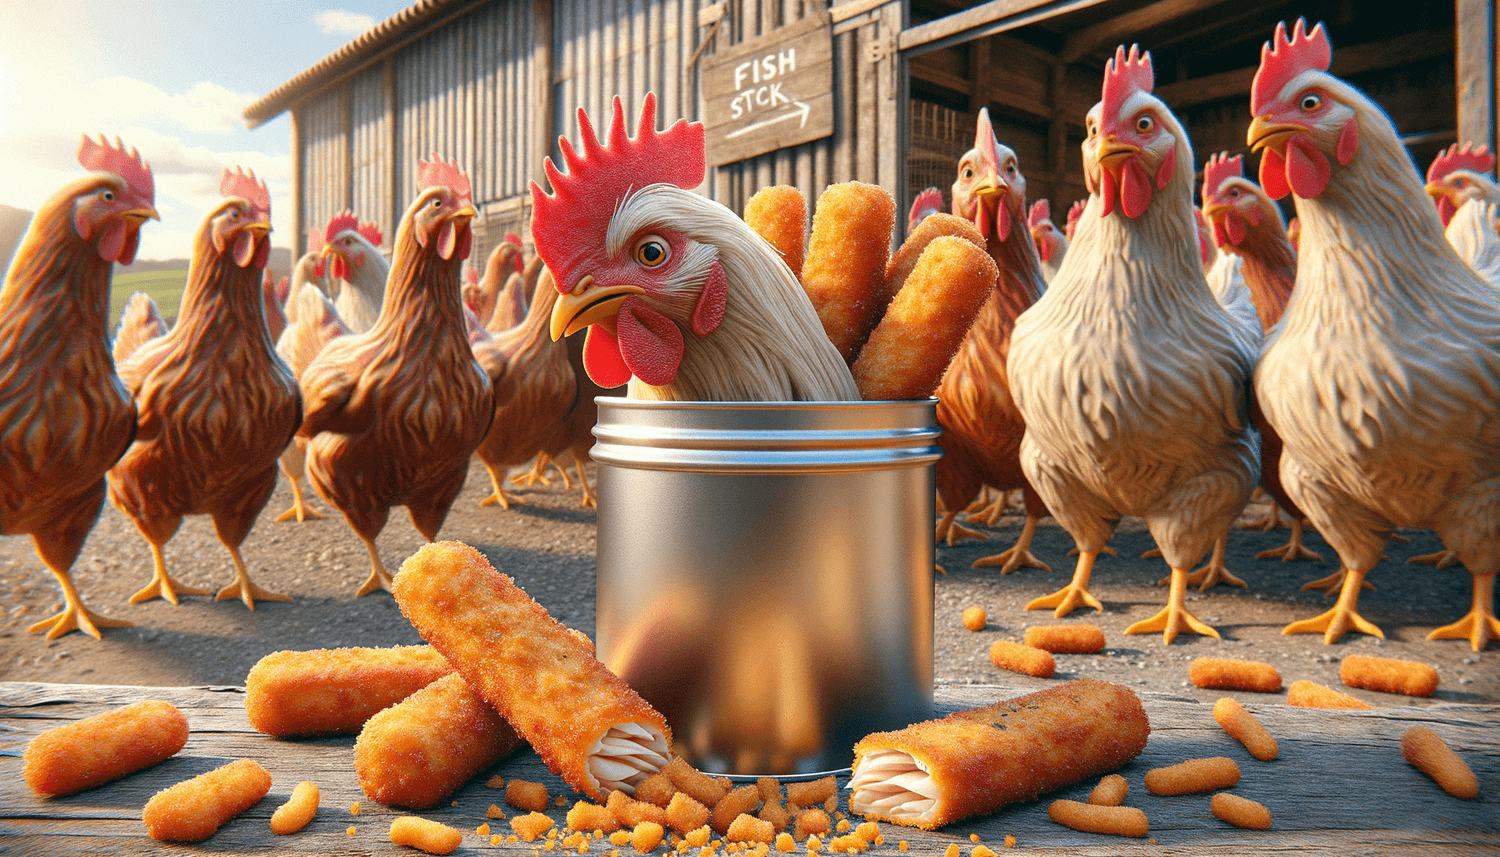 Can Chickens Eat Fish Sticks?